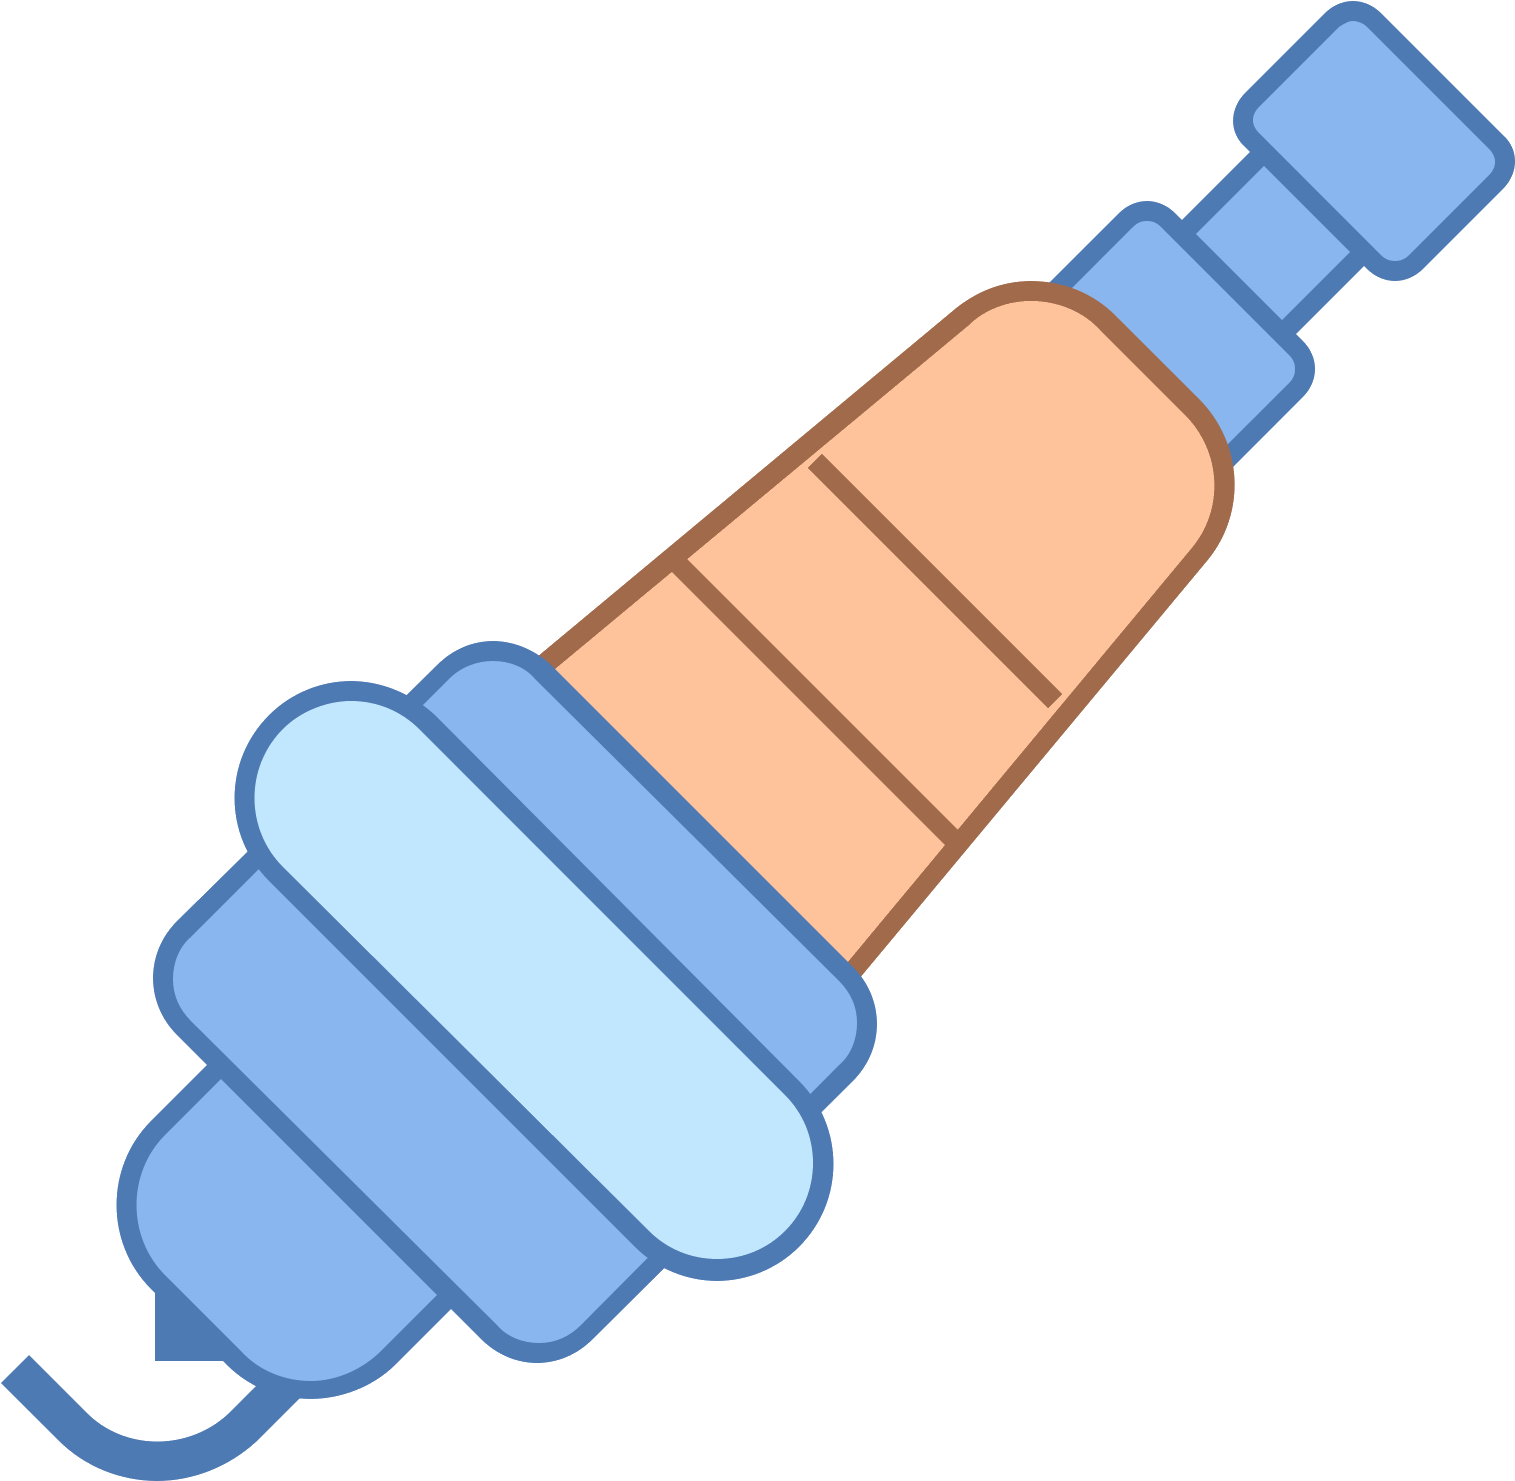 Spark Plug Graphic PNG